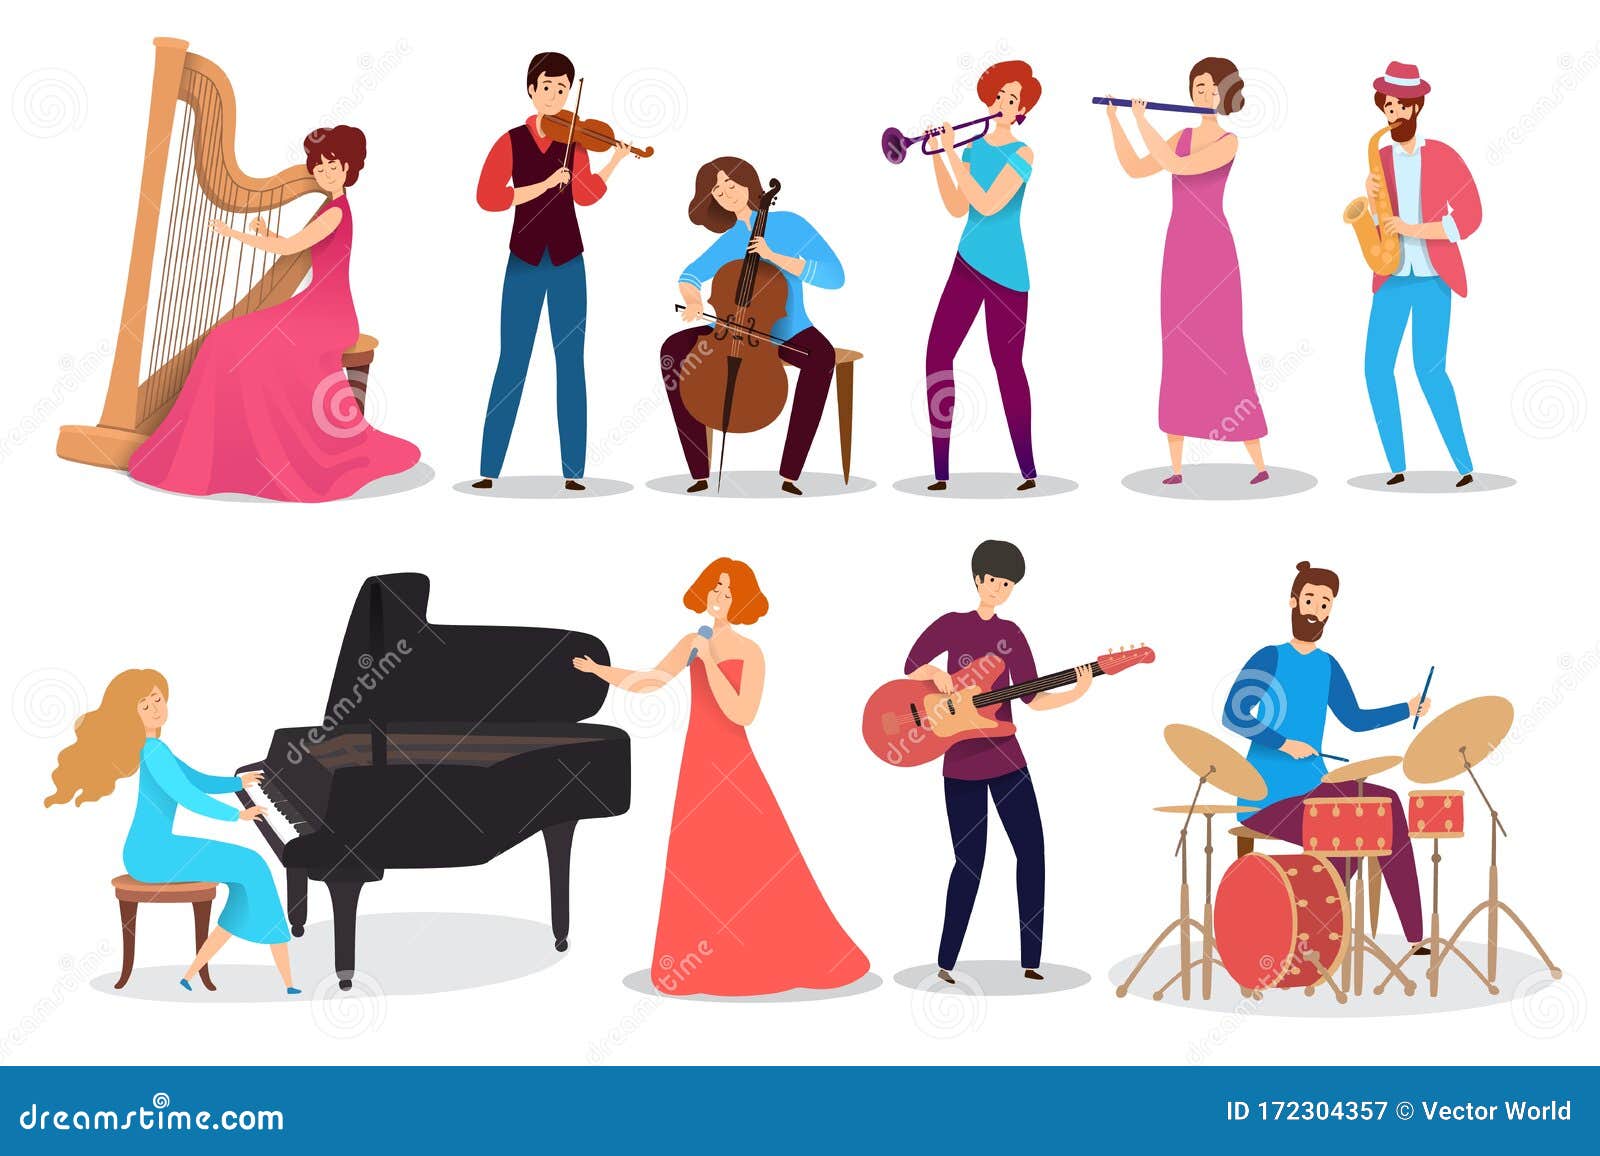 People Playing Musical Instruments, Set of Isolated Cartoon Characters,  Vector Illustration Stock Vector - Illustration of festival, musical:  172304357